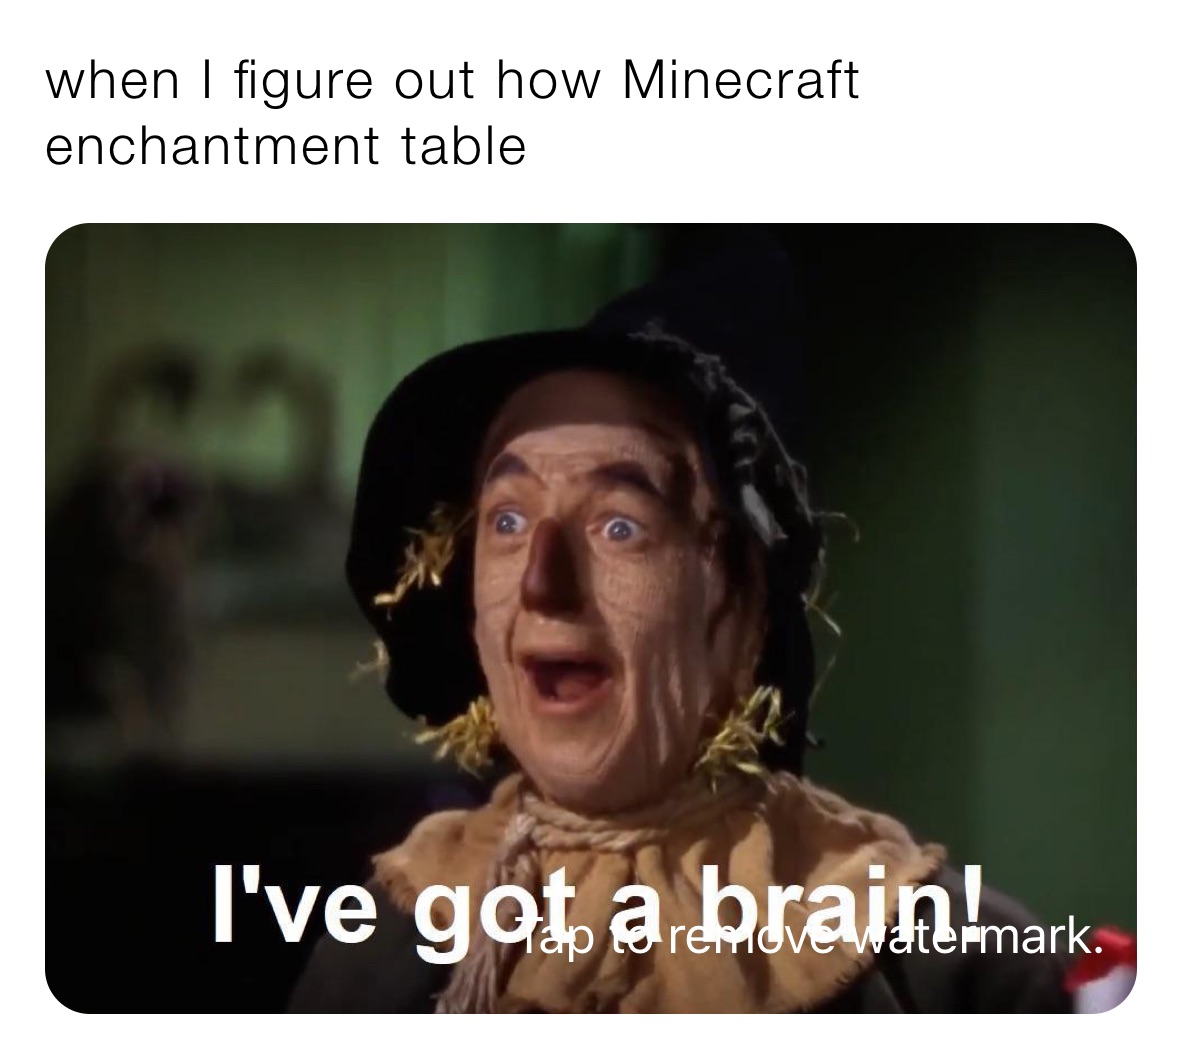 when I figure out how Minecraft enchantment table